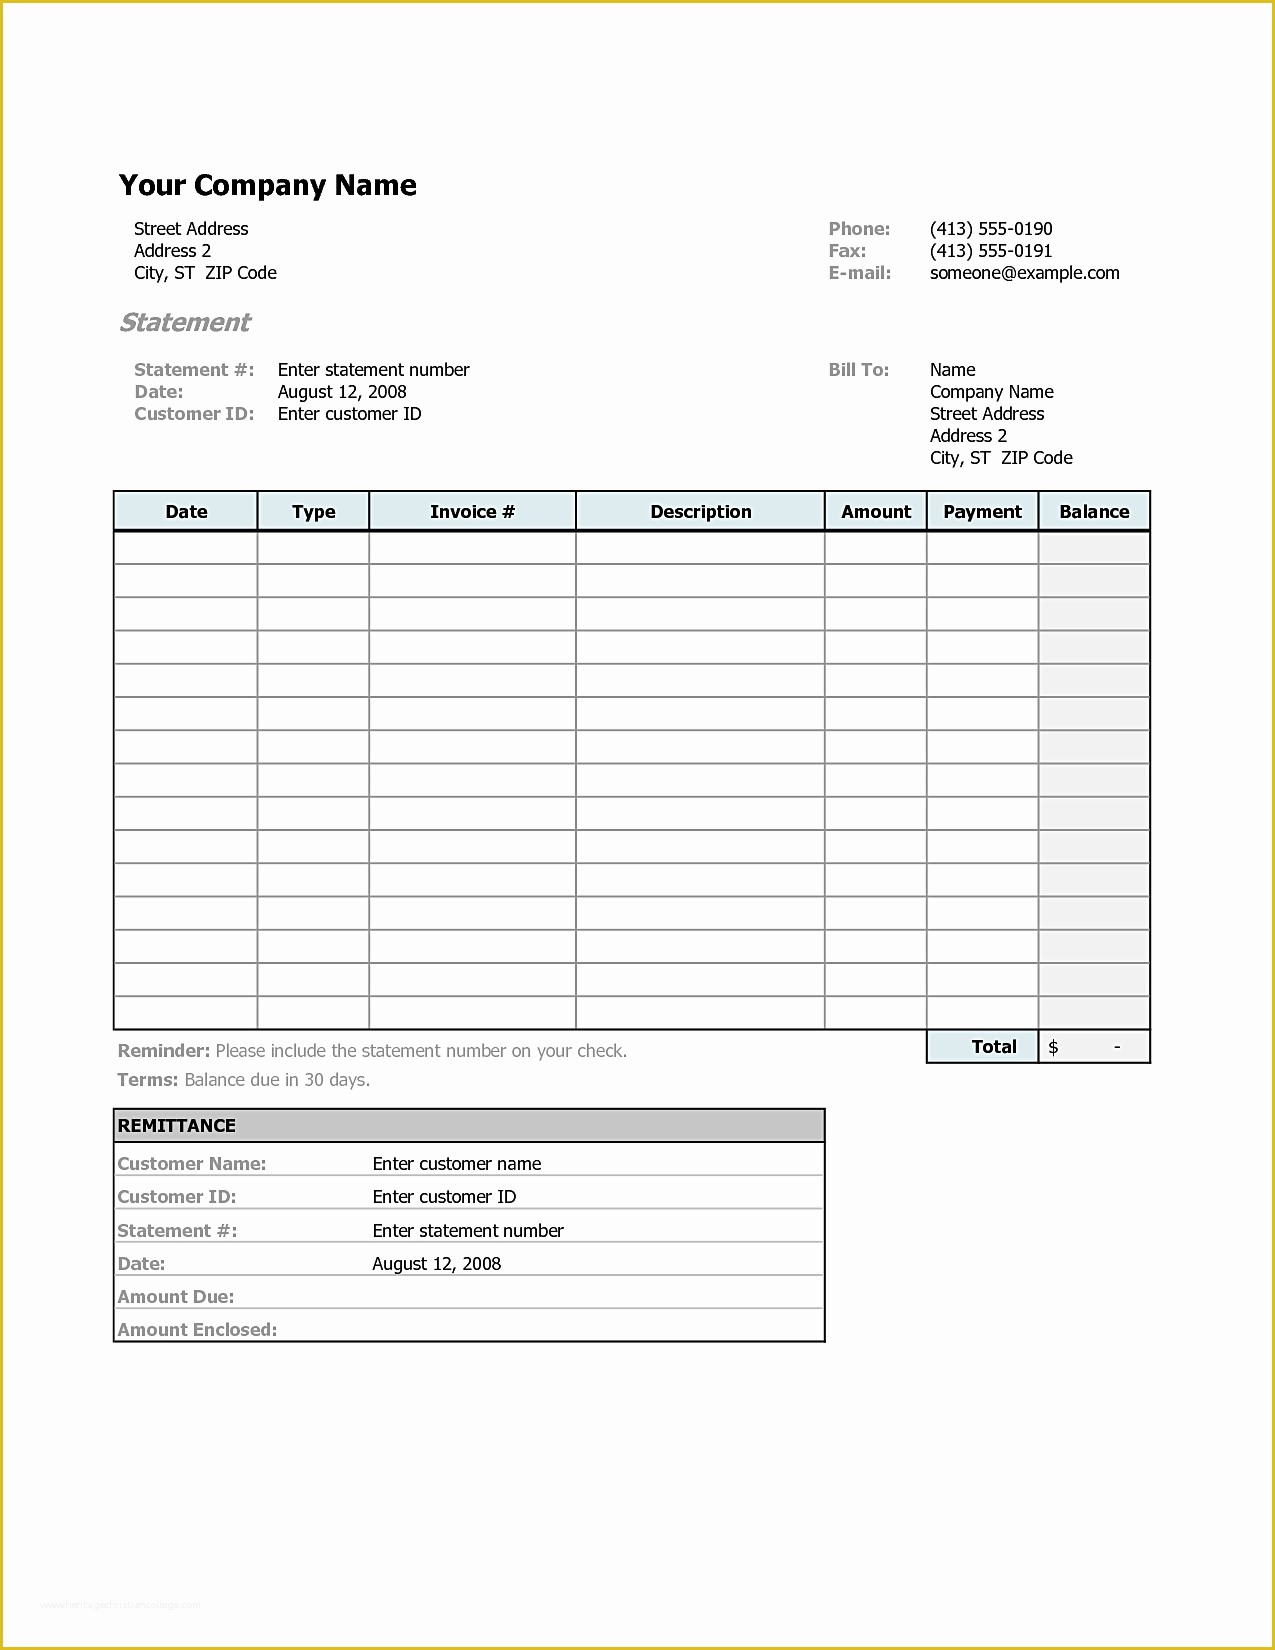 Free Bill Invoice Template Printable Of Invoice Statement Template Residers Info Free Printable